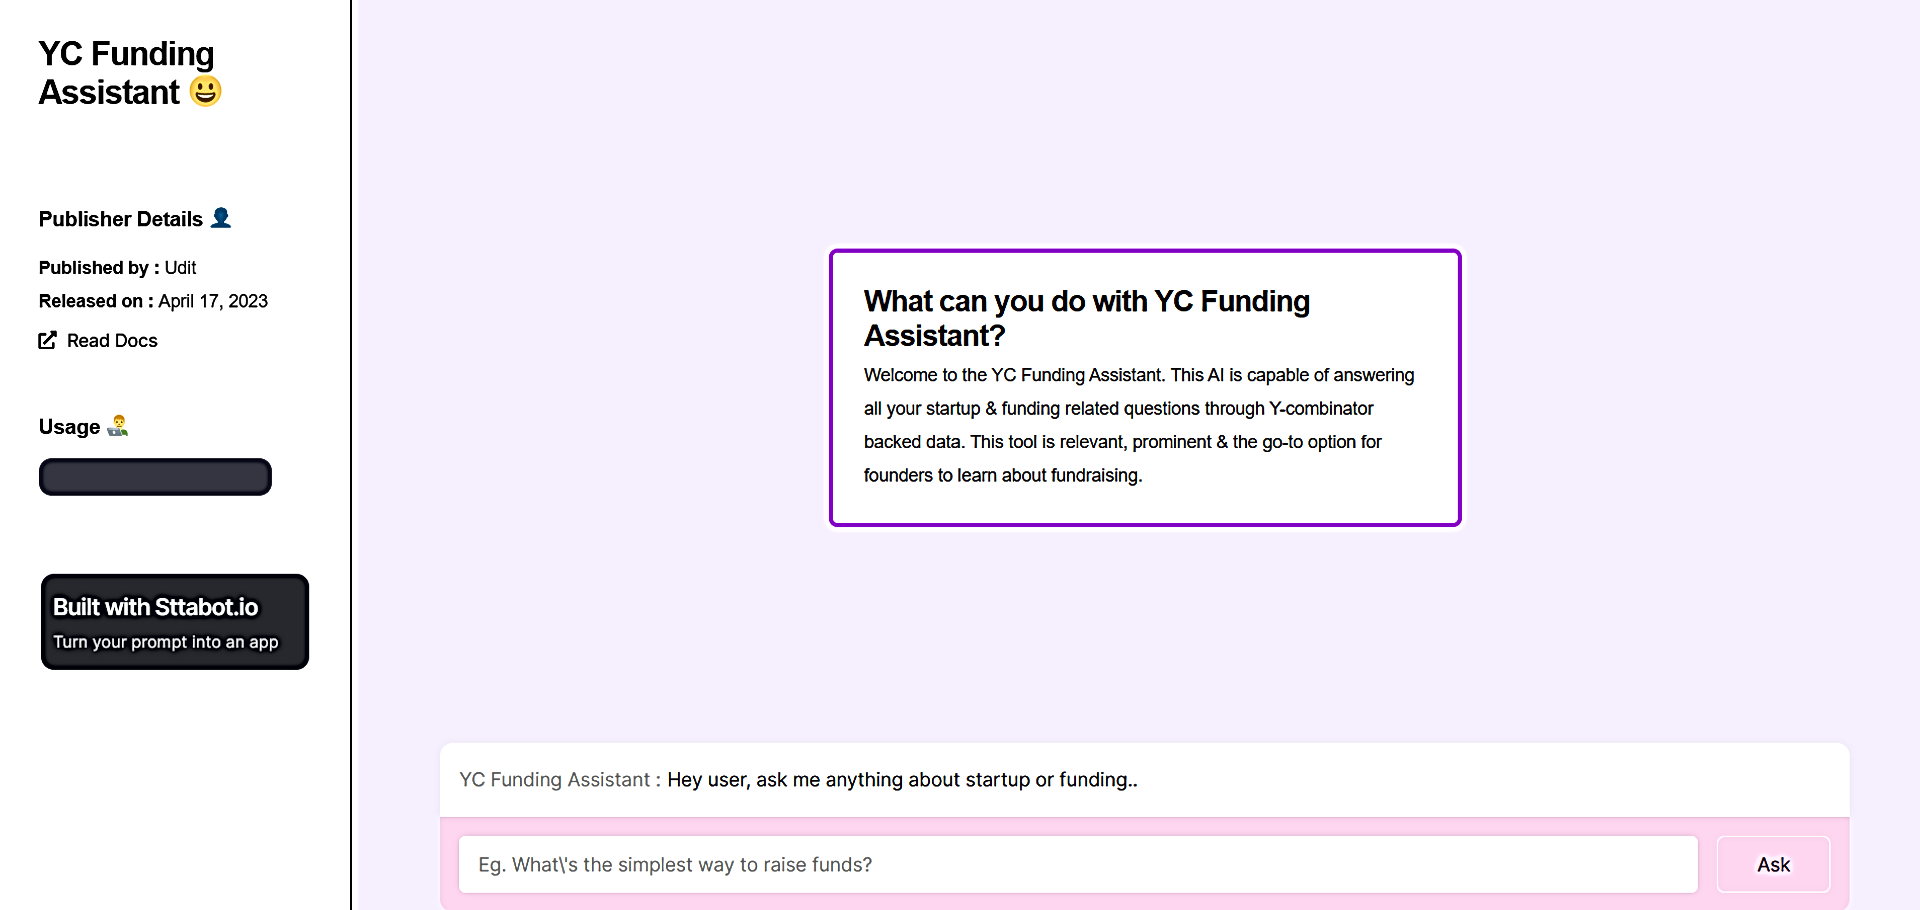 YC Funding Assistant featured